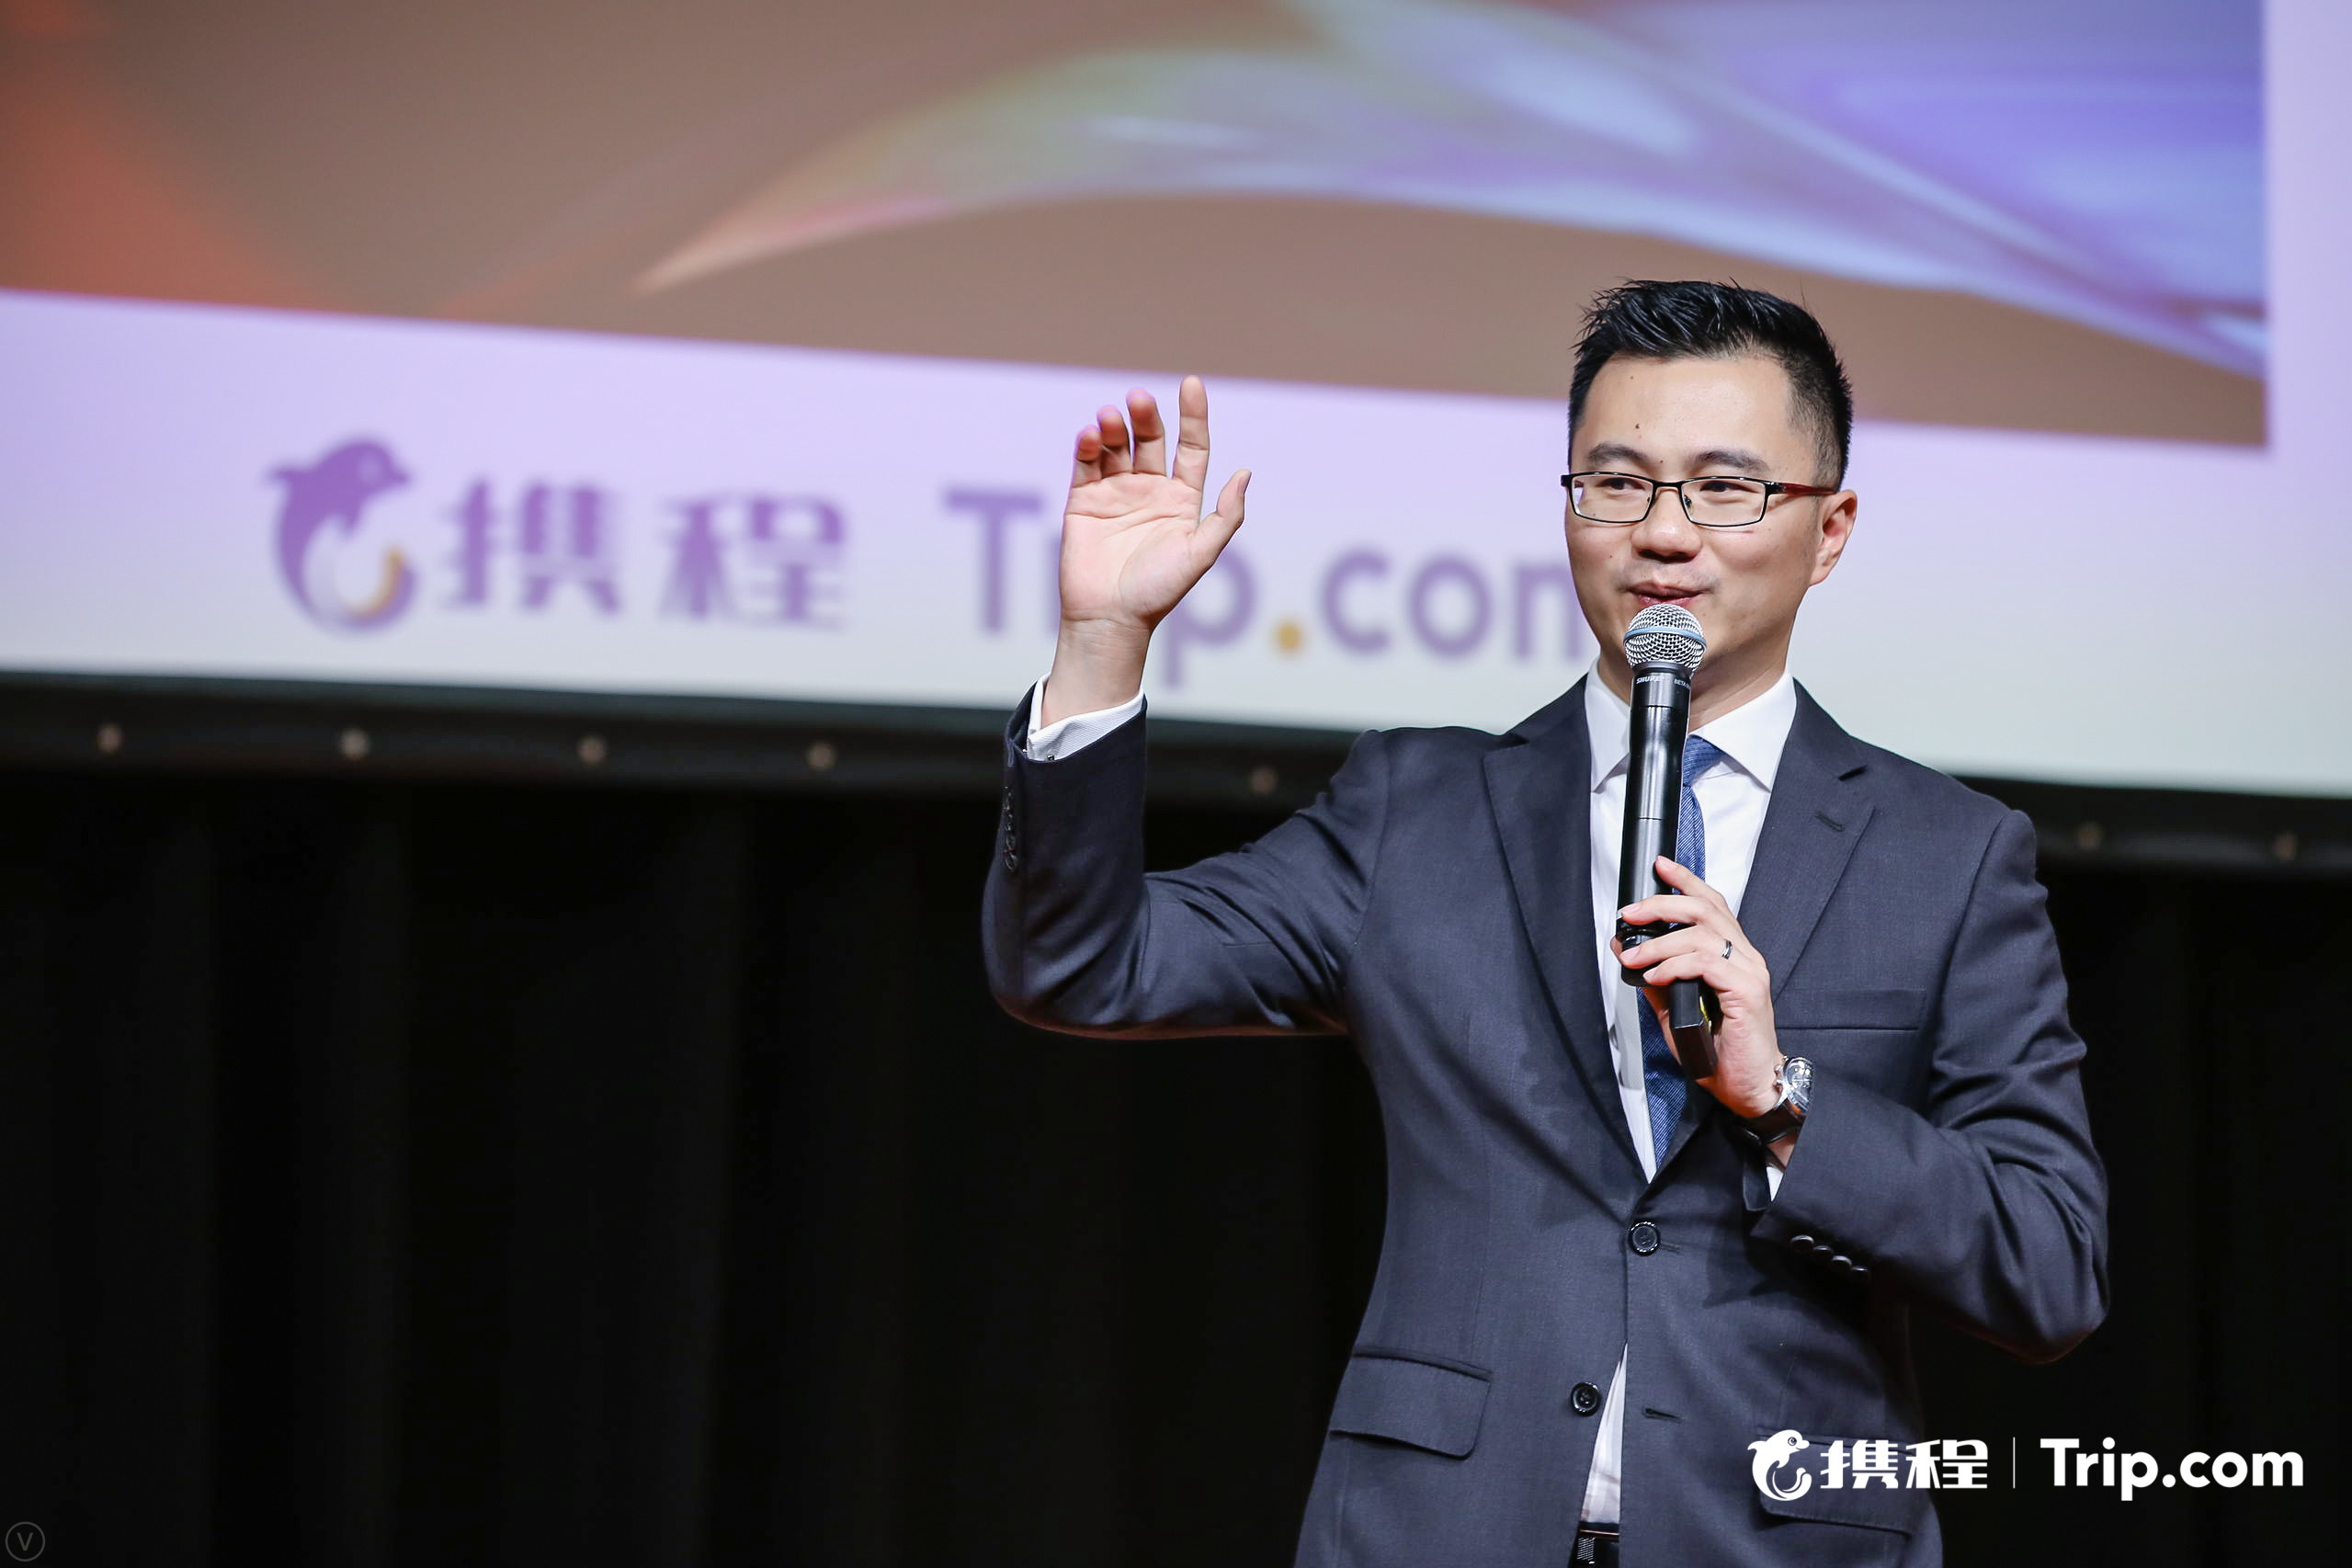 Trip.com General Manager of Destination Marketing Edison Chen Speaks at ITB Asia 2019